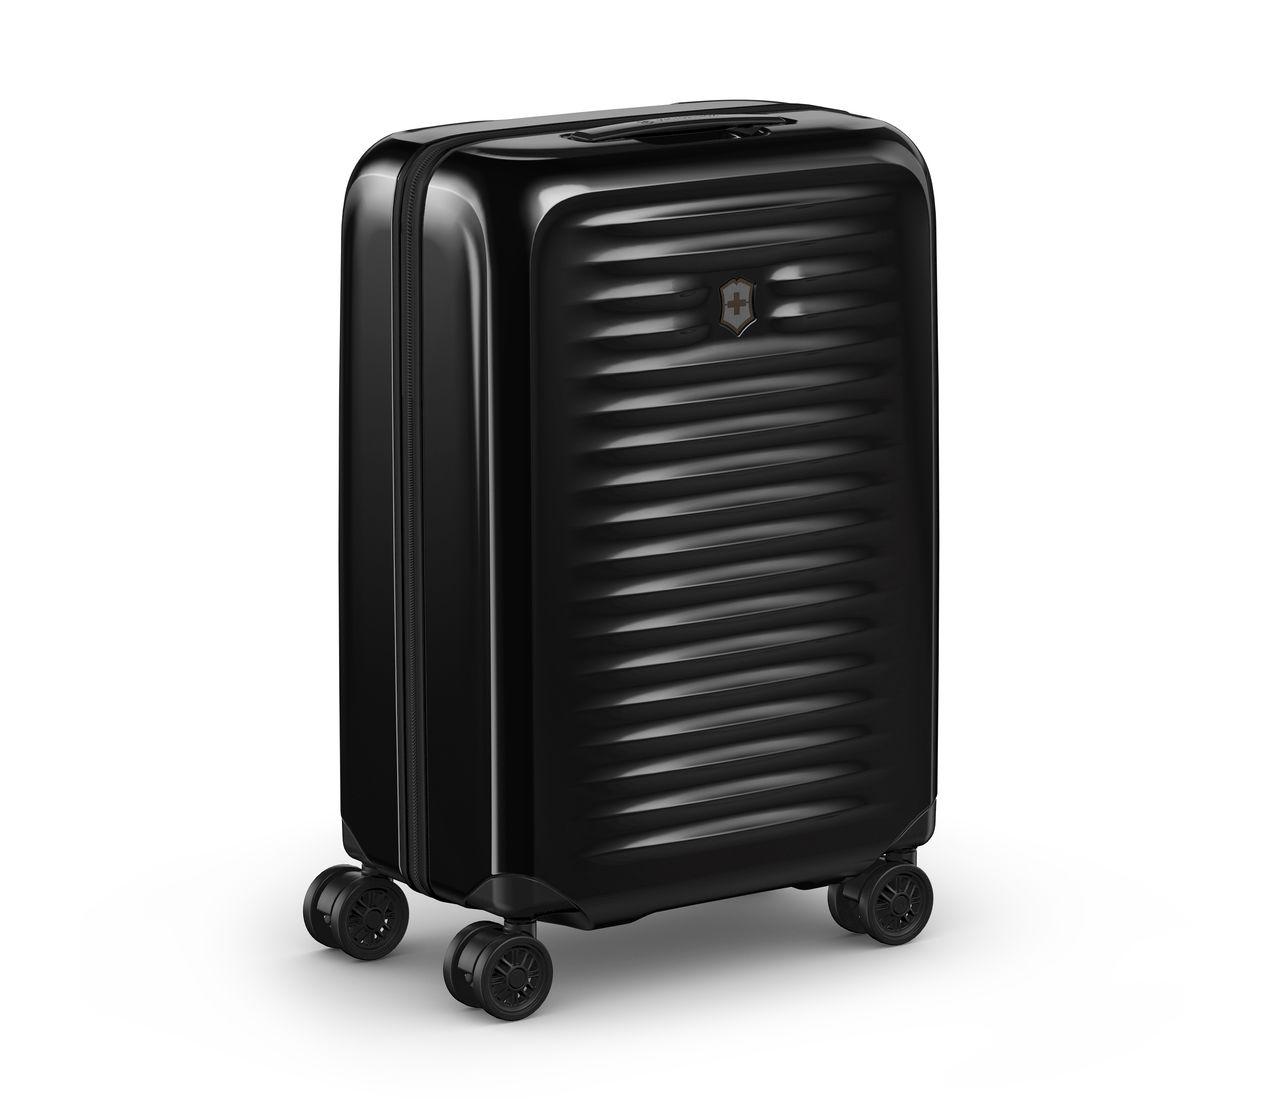 Airox Frequent Flyer Plus Hardside Carry-On-612503